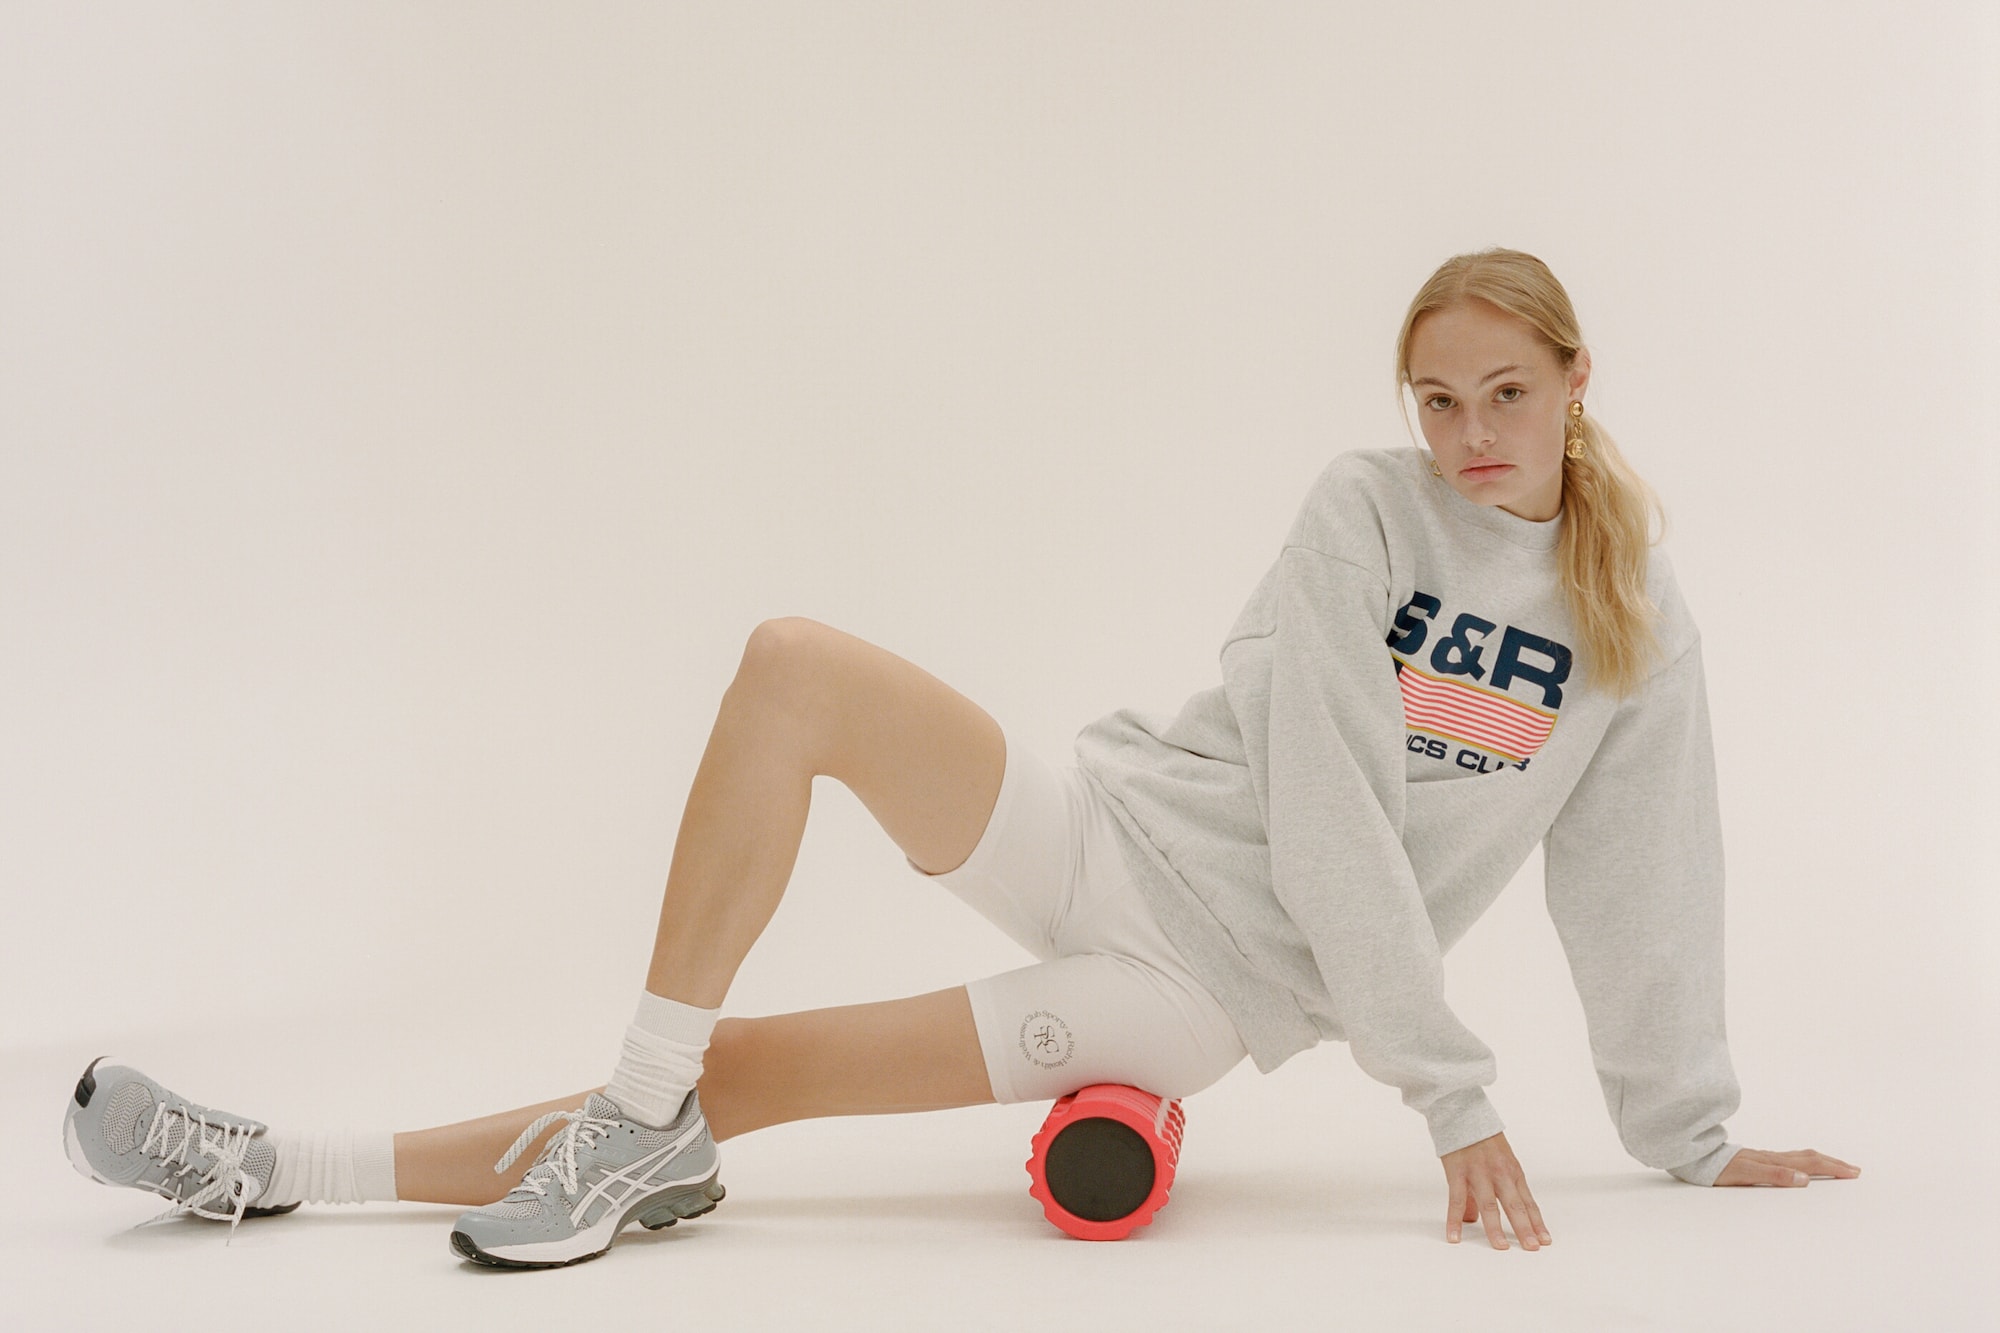 Sporty & Rich Fall/Winter 19 Collection Lookbook Emily Oberg Hoodies Print Sneakers T-Shirt Retro Inspired Fashion